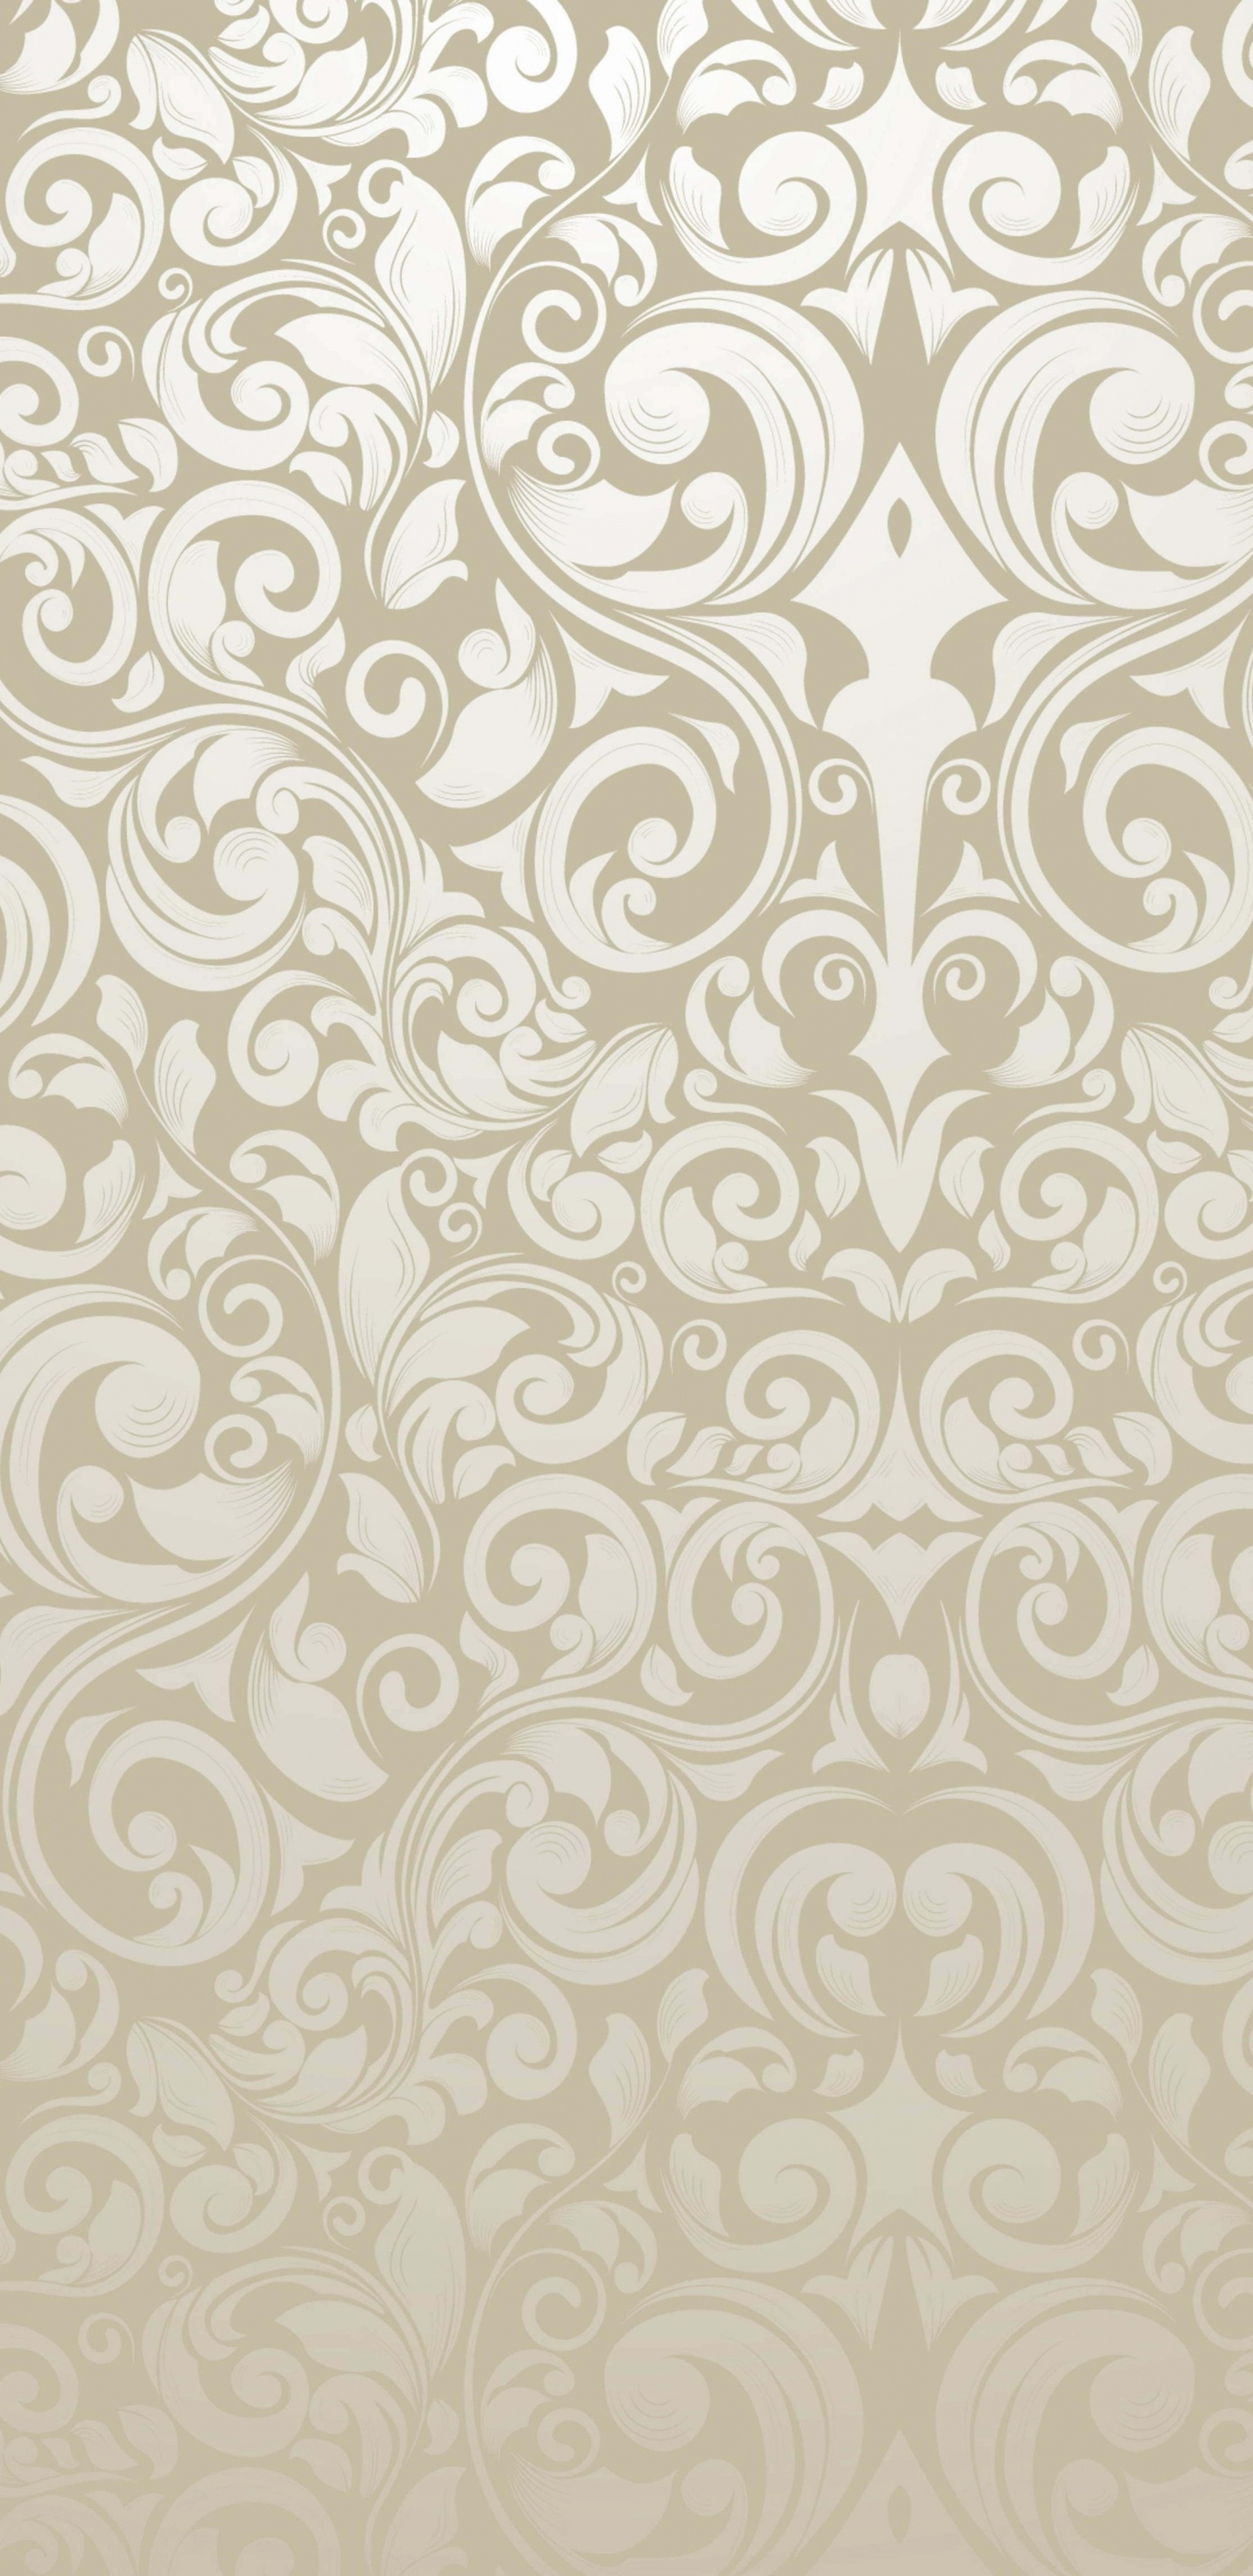 White and Black Floral Textile. Wallpaper in 1440x2960 Resolution